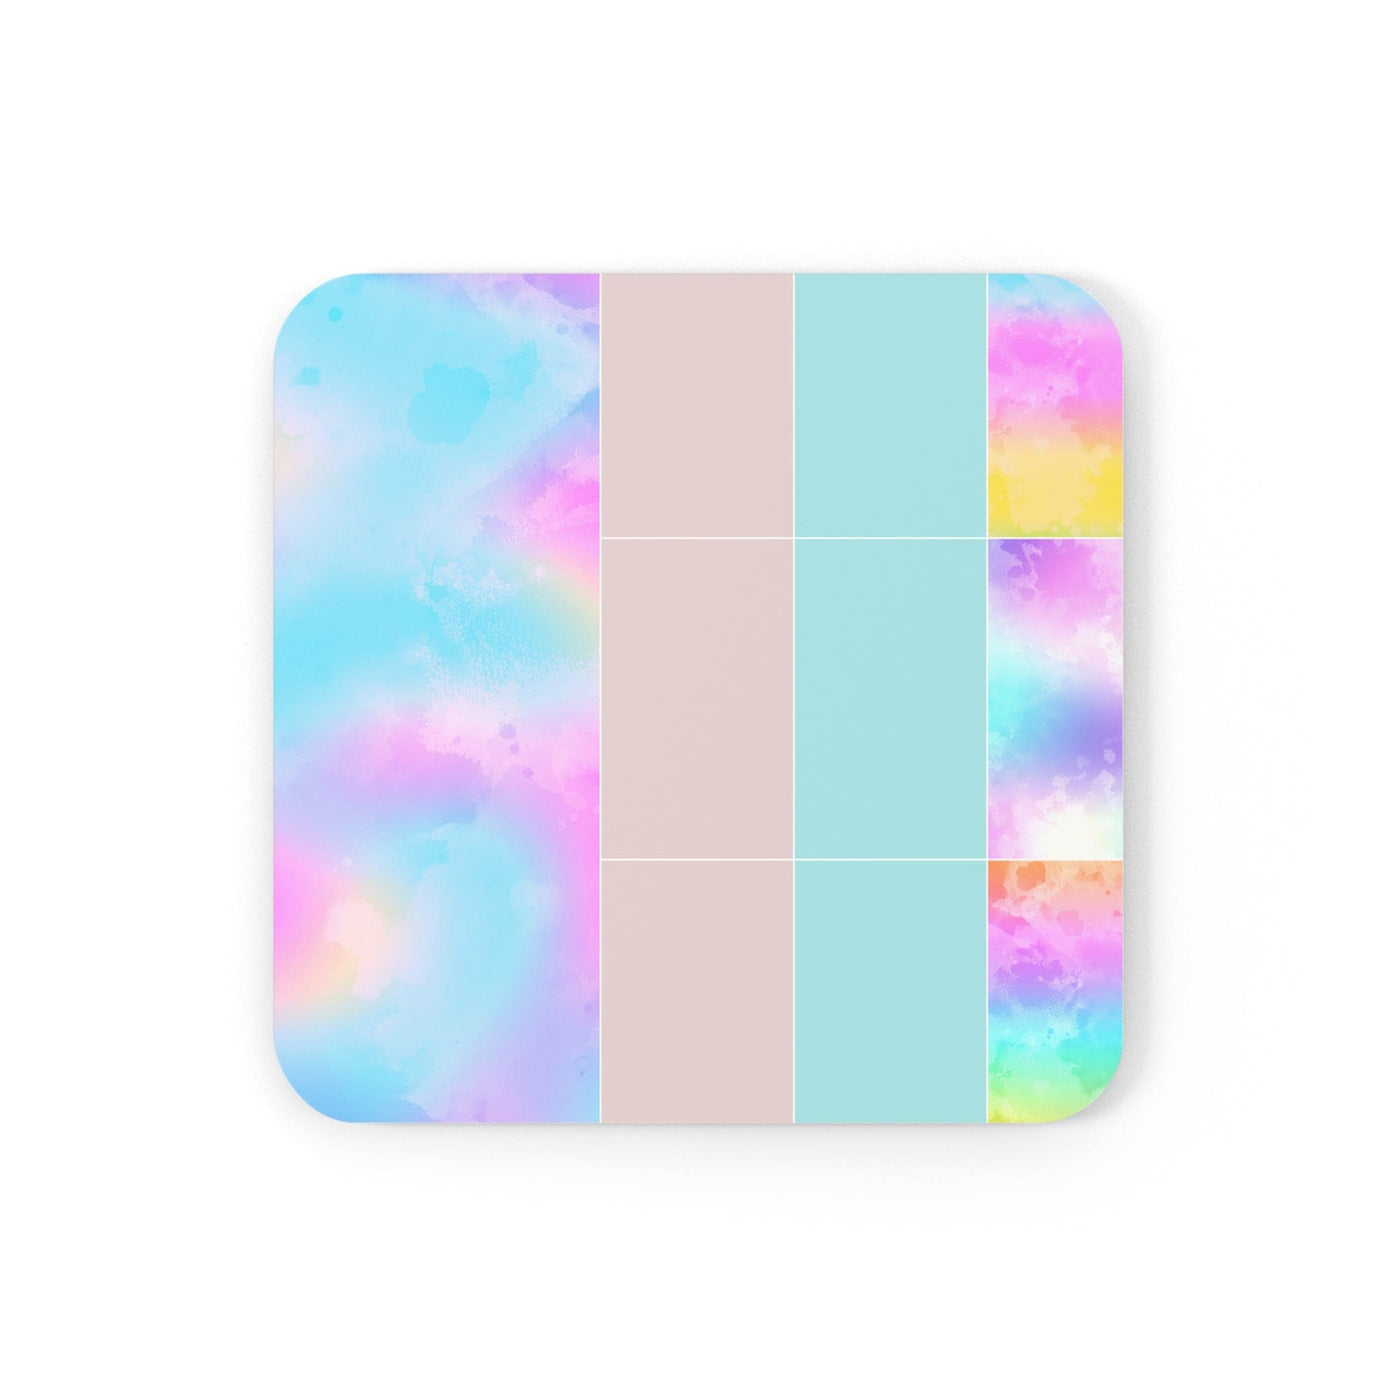 Coaster Set Of 4 For Drinks Pastel Colorblock Watercolor Illustration